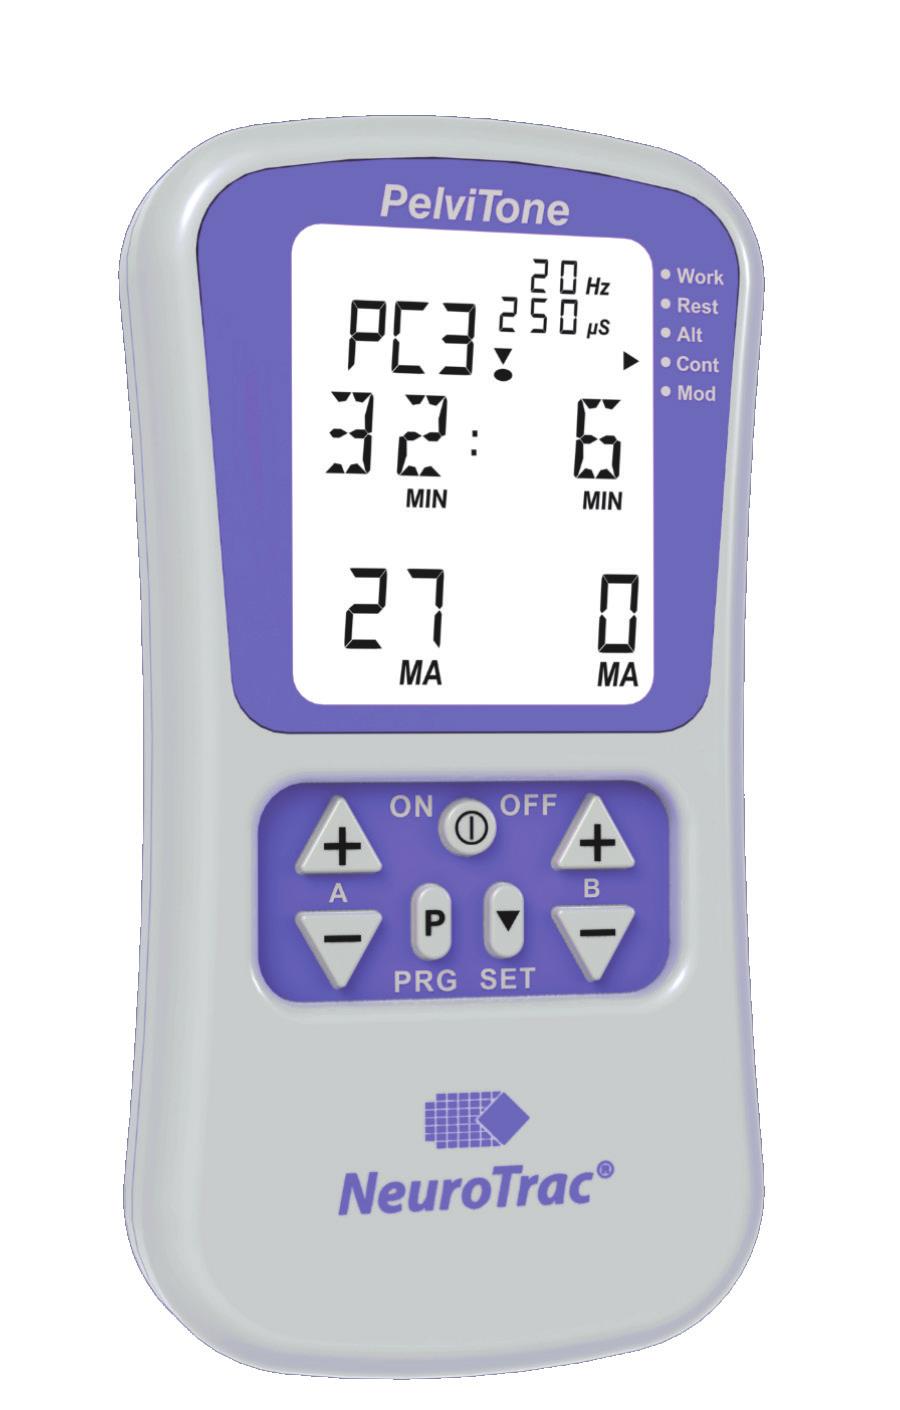 Incontinence Pelvitone Dual channel NMES device for Incontinence Electrical stimulation provided by PelviTone is used to treat urinary incontinence by sending a mild electric current to nerves in the